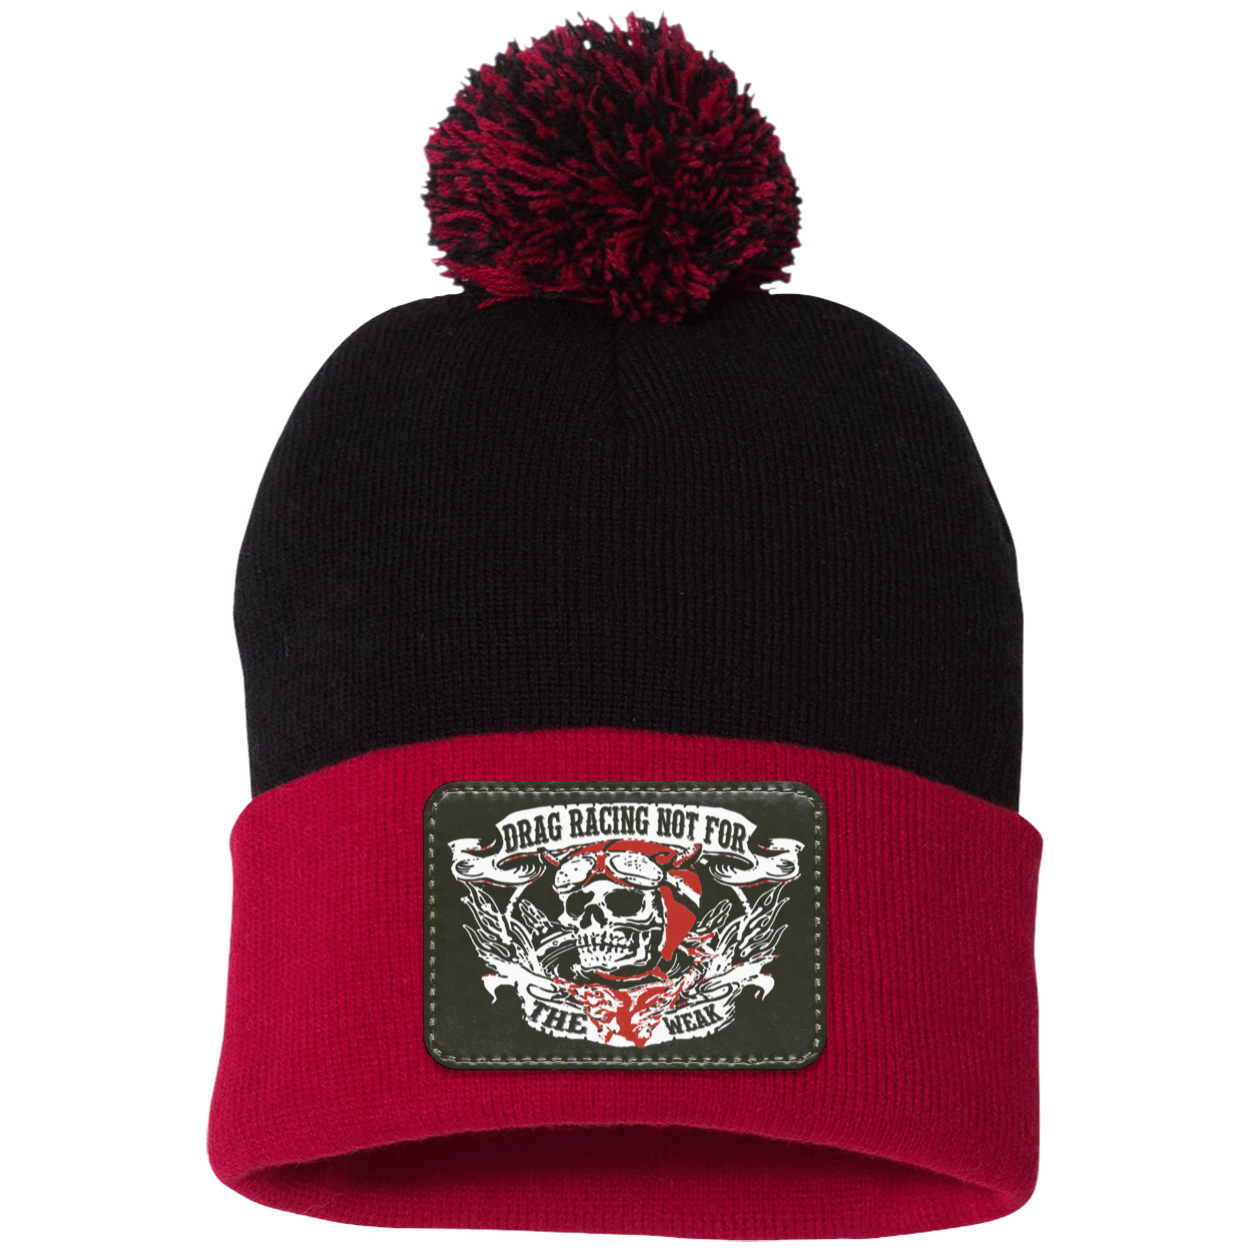 Drag Racing Not For The Weak Patched Pom Pom Knit Cap V1